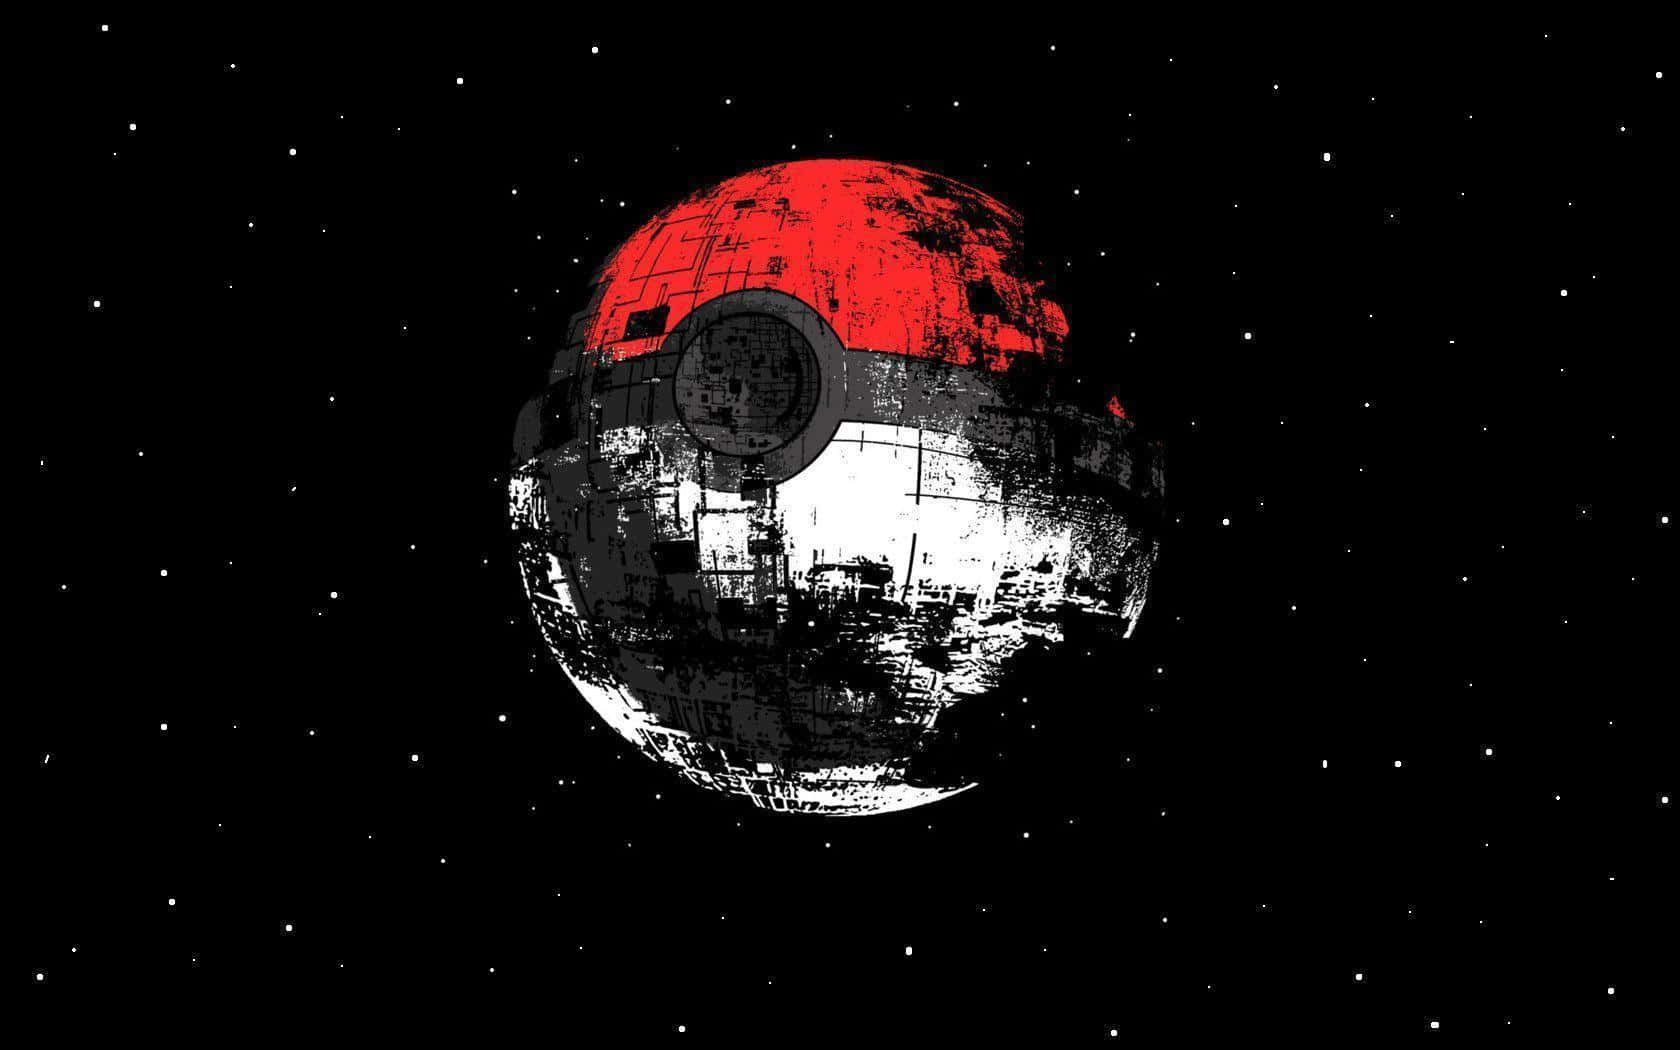 Catch 'em all: A detailed Pokeball on a black background